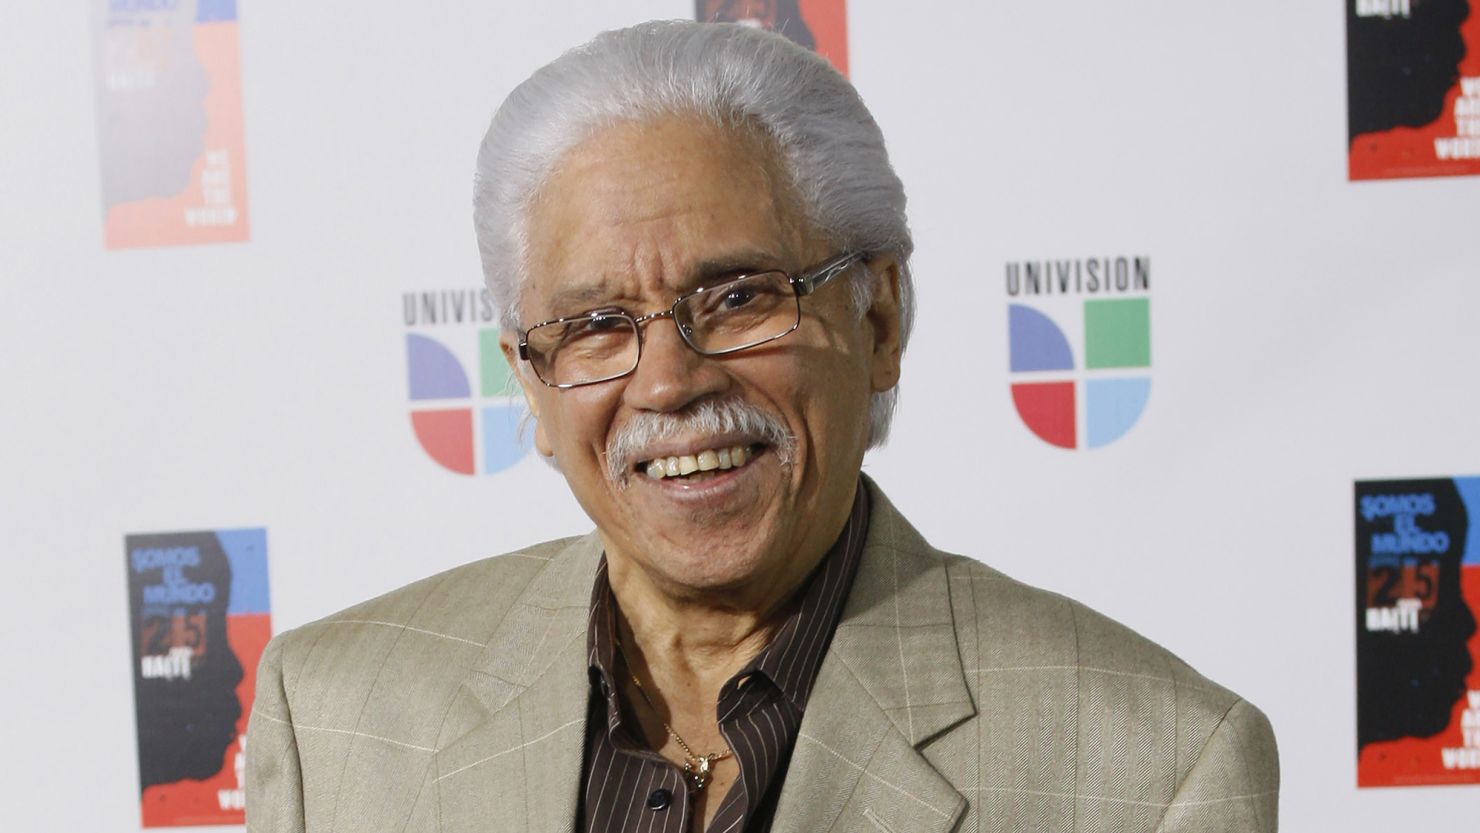 Johnny Pacheco, considered the "godfather of salsa" for popularizing the Latin musical genre, has died at 85. 